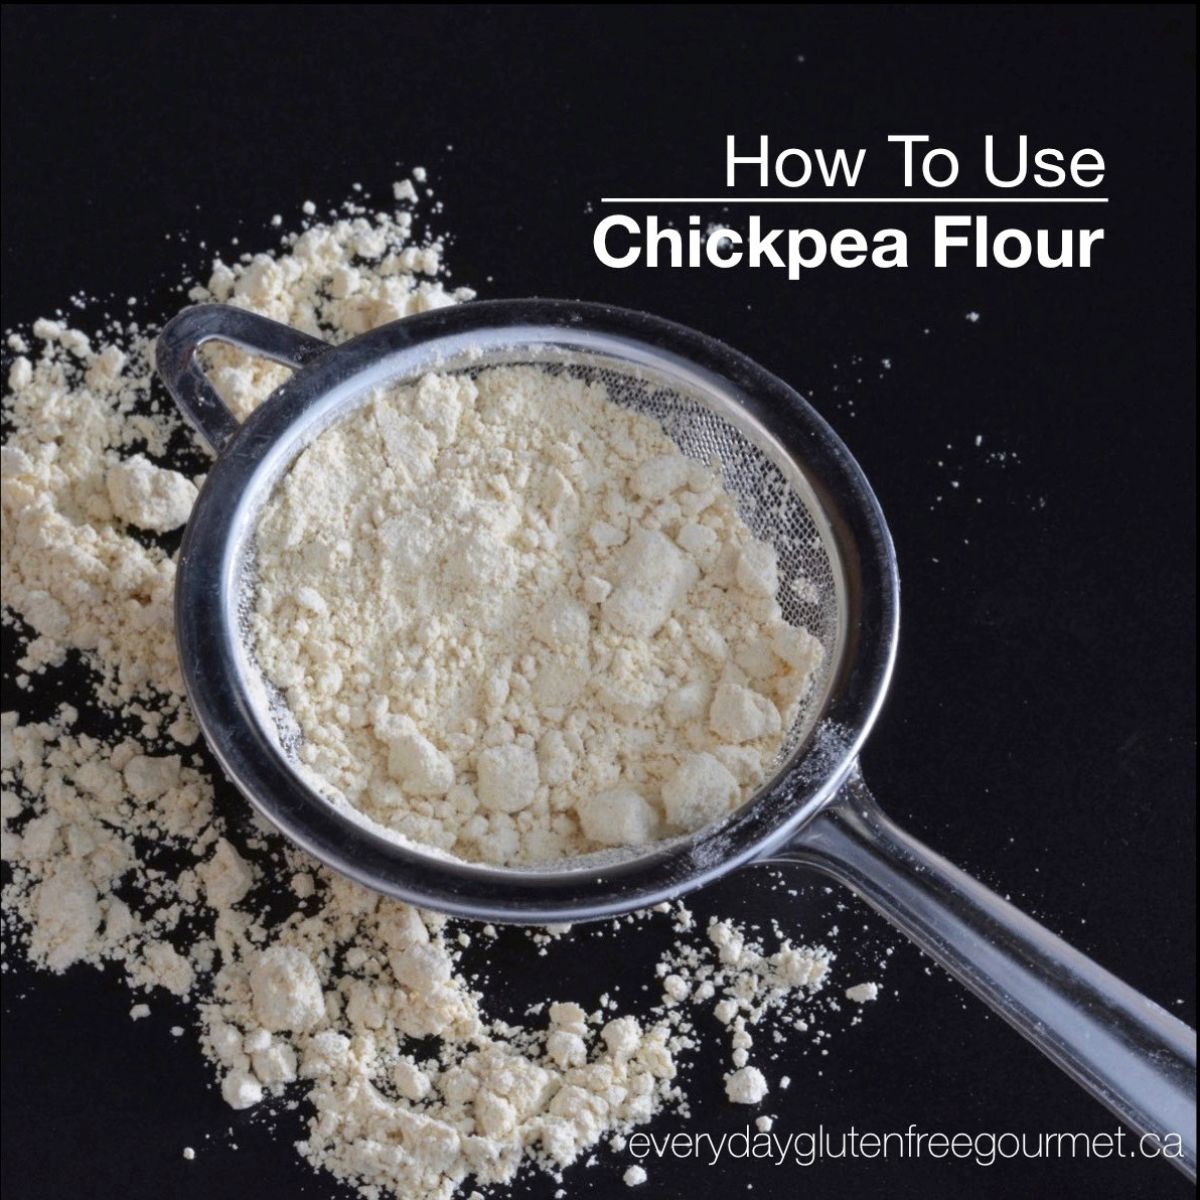 How to use chickpea flour explains the properties and best uses of this flour. It's part of a 12-post series to help you learn more about the gluten free flours you can use and what you can make with them. 